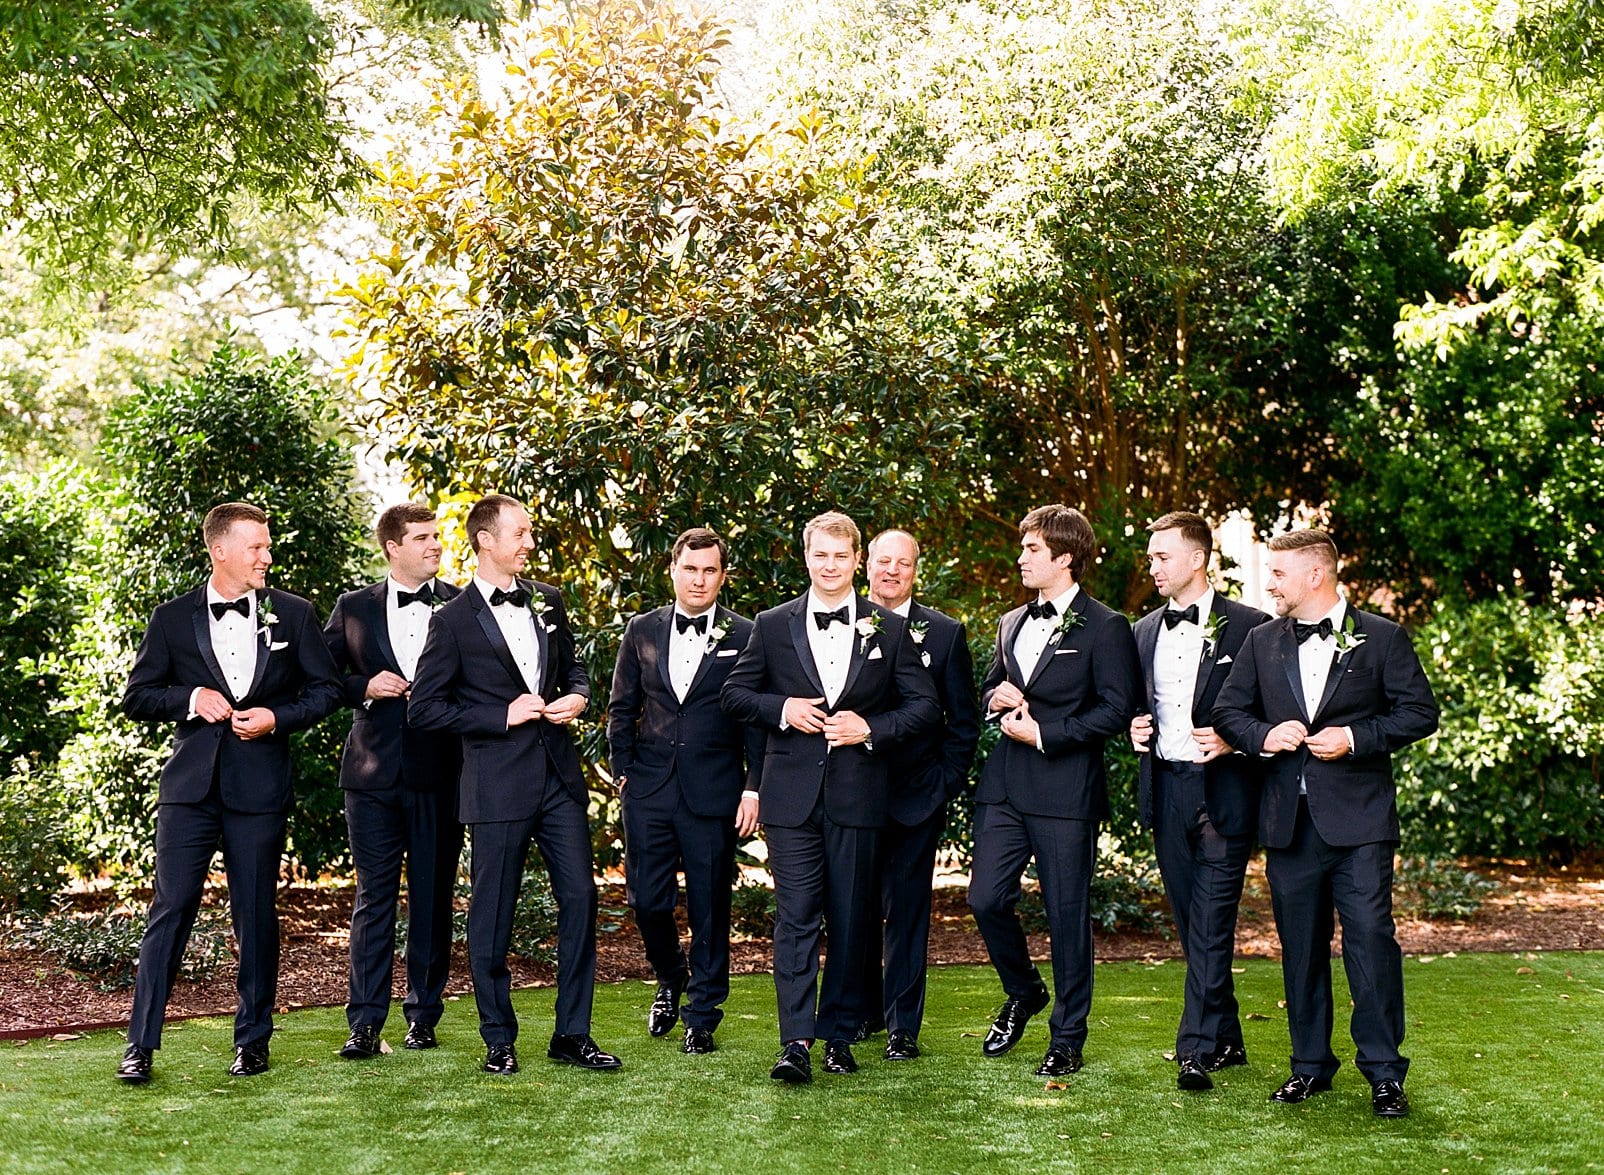 Merrimon Wynne groom walking and buttoning his jacket with his groomsmen photo